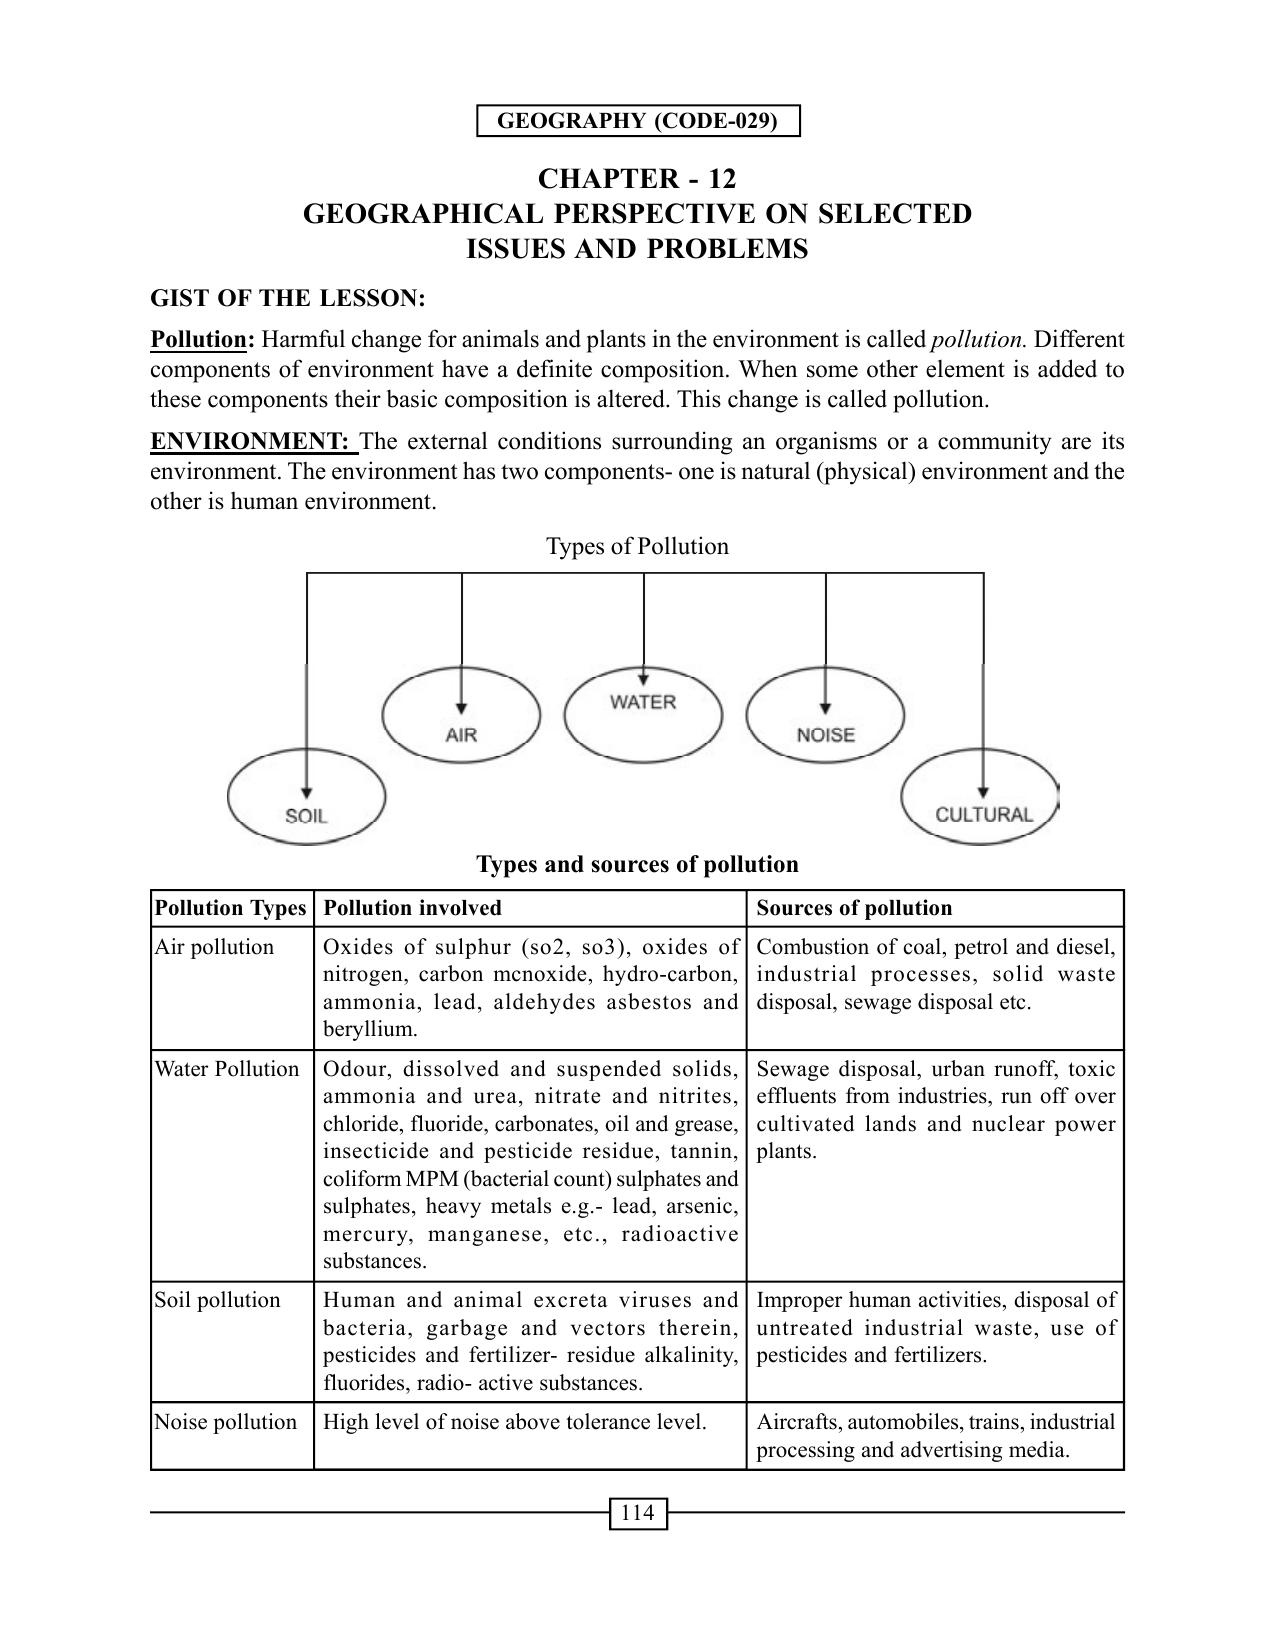 CBSE Worksheets for Class 12 Geography Geographical Perspective on Selected Issues and Problems - Page 1